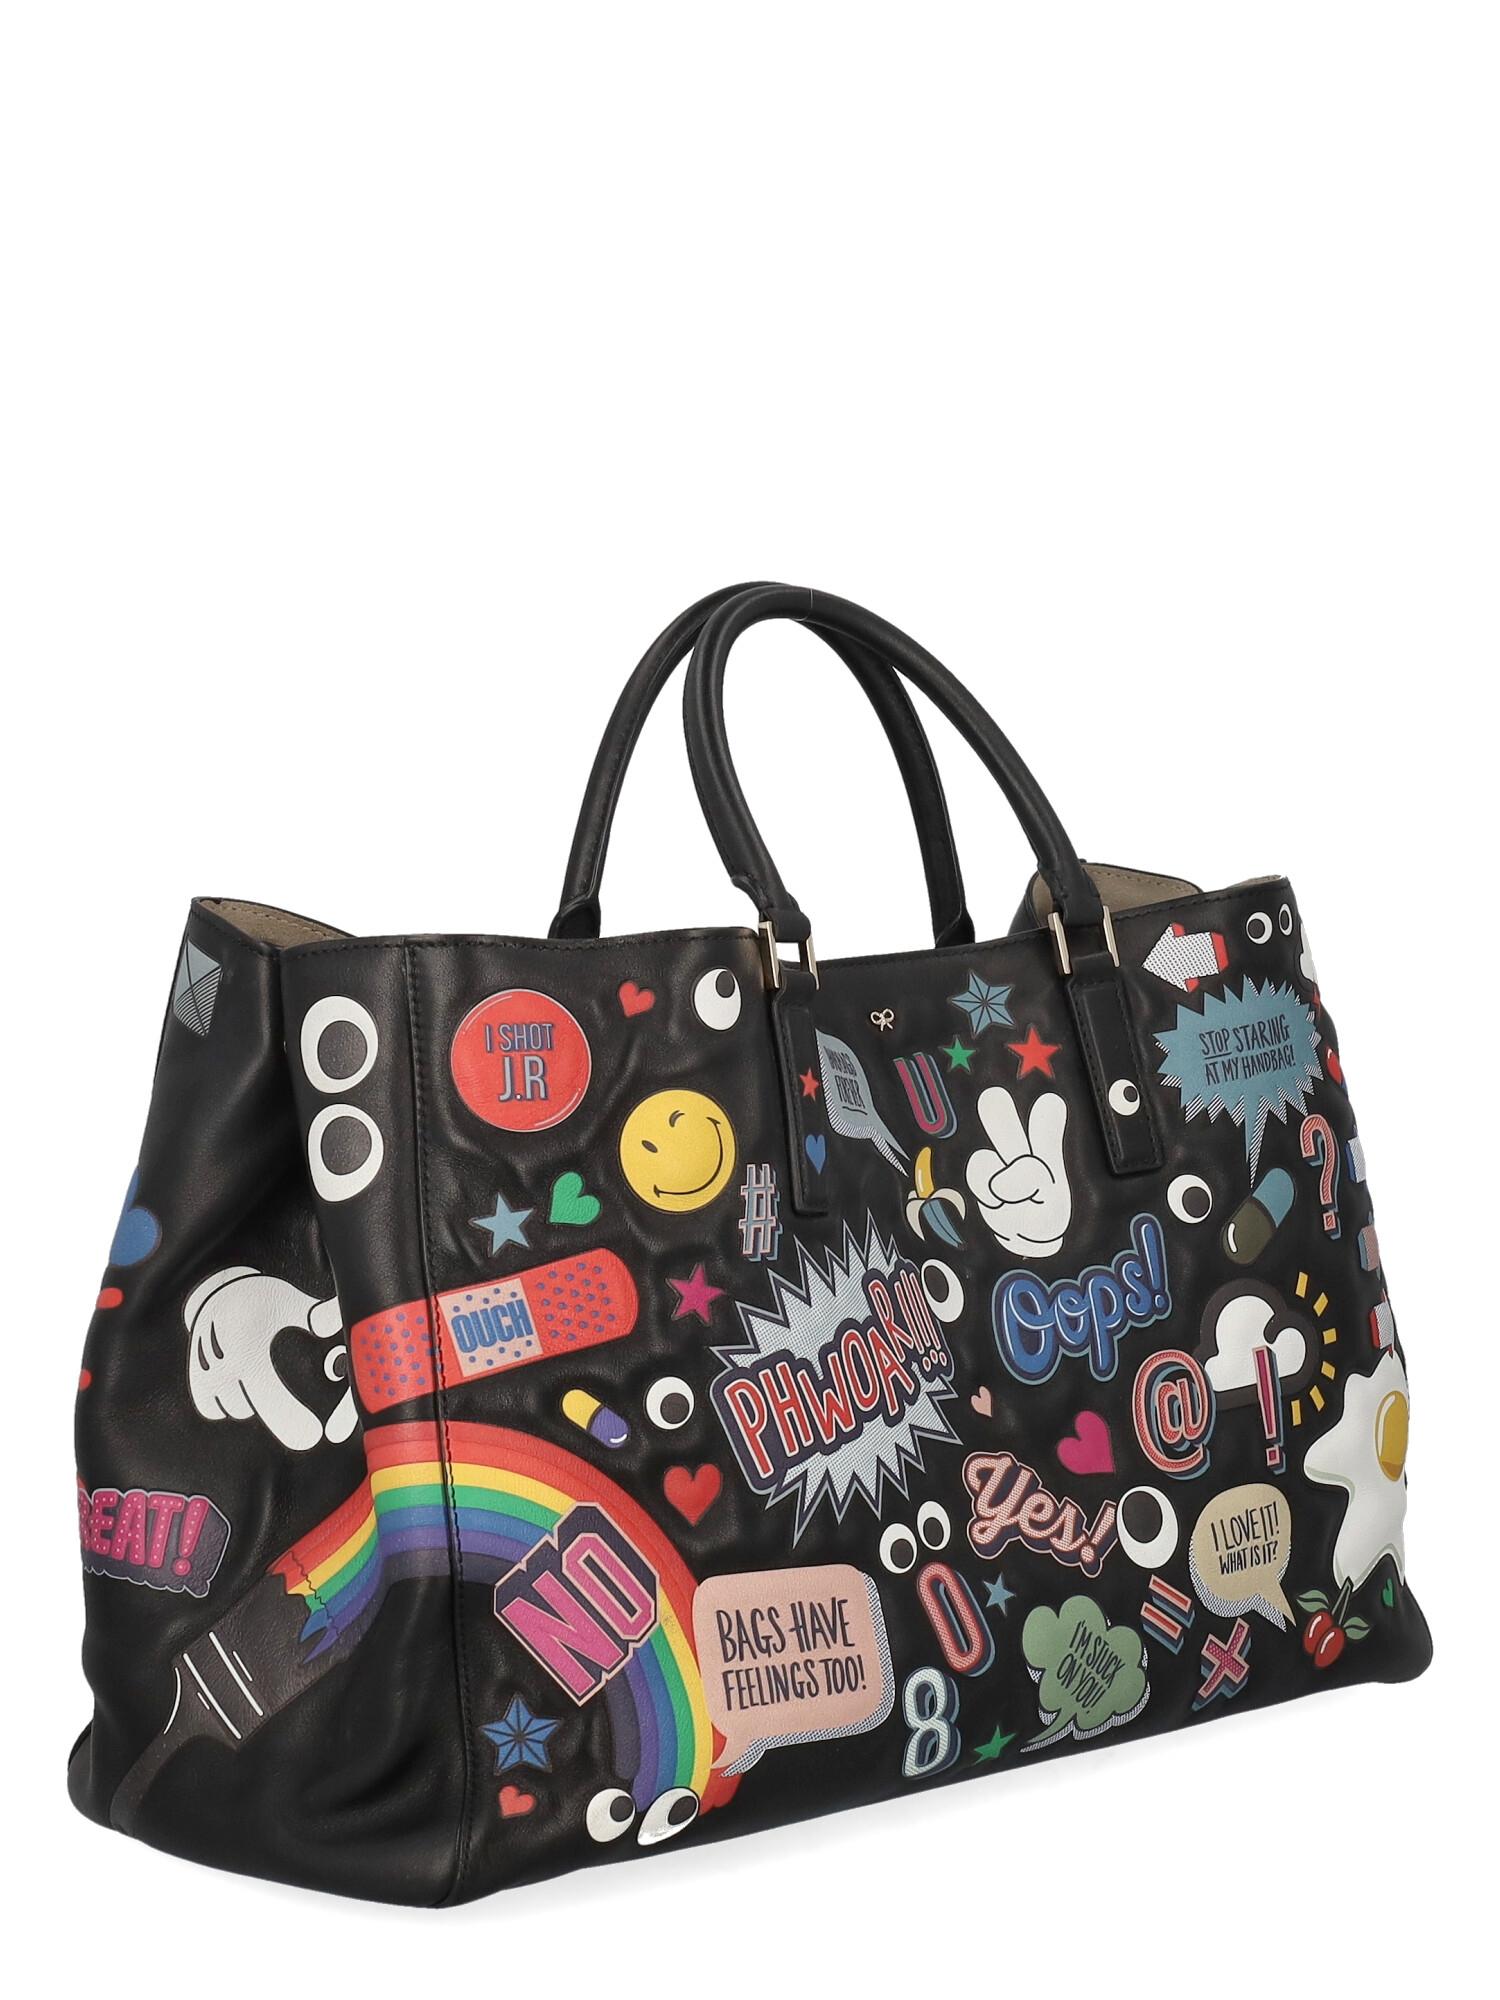 Anya Hindmarch Women Handbags Black, Multicolor Leather  In Good Condition For Sale In Milan, IT